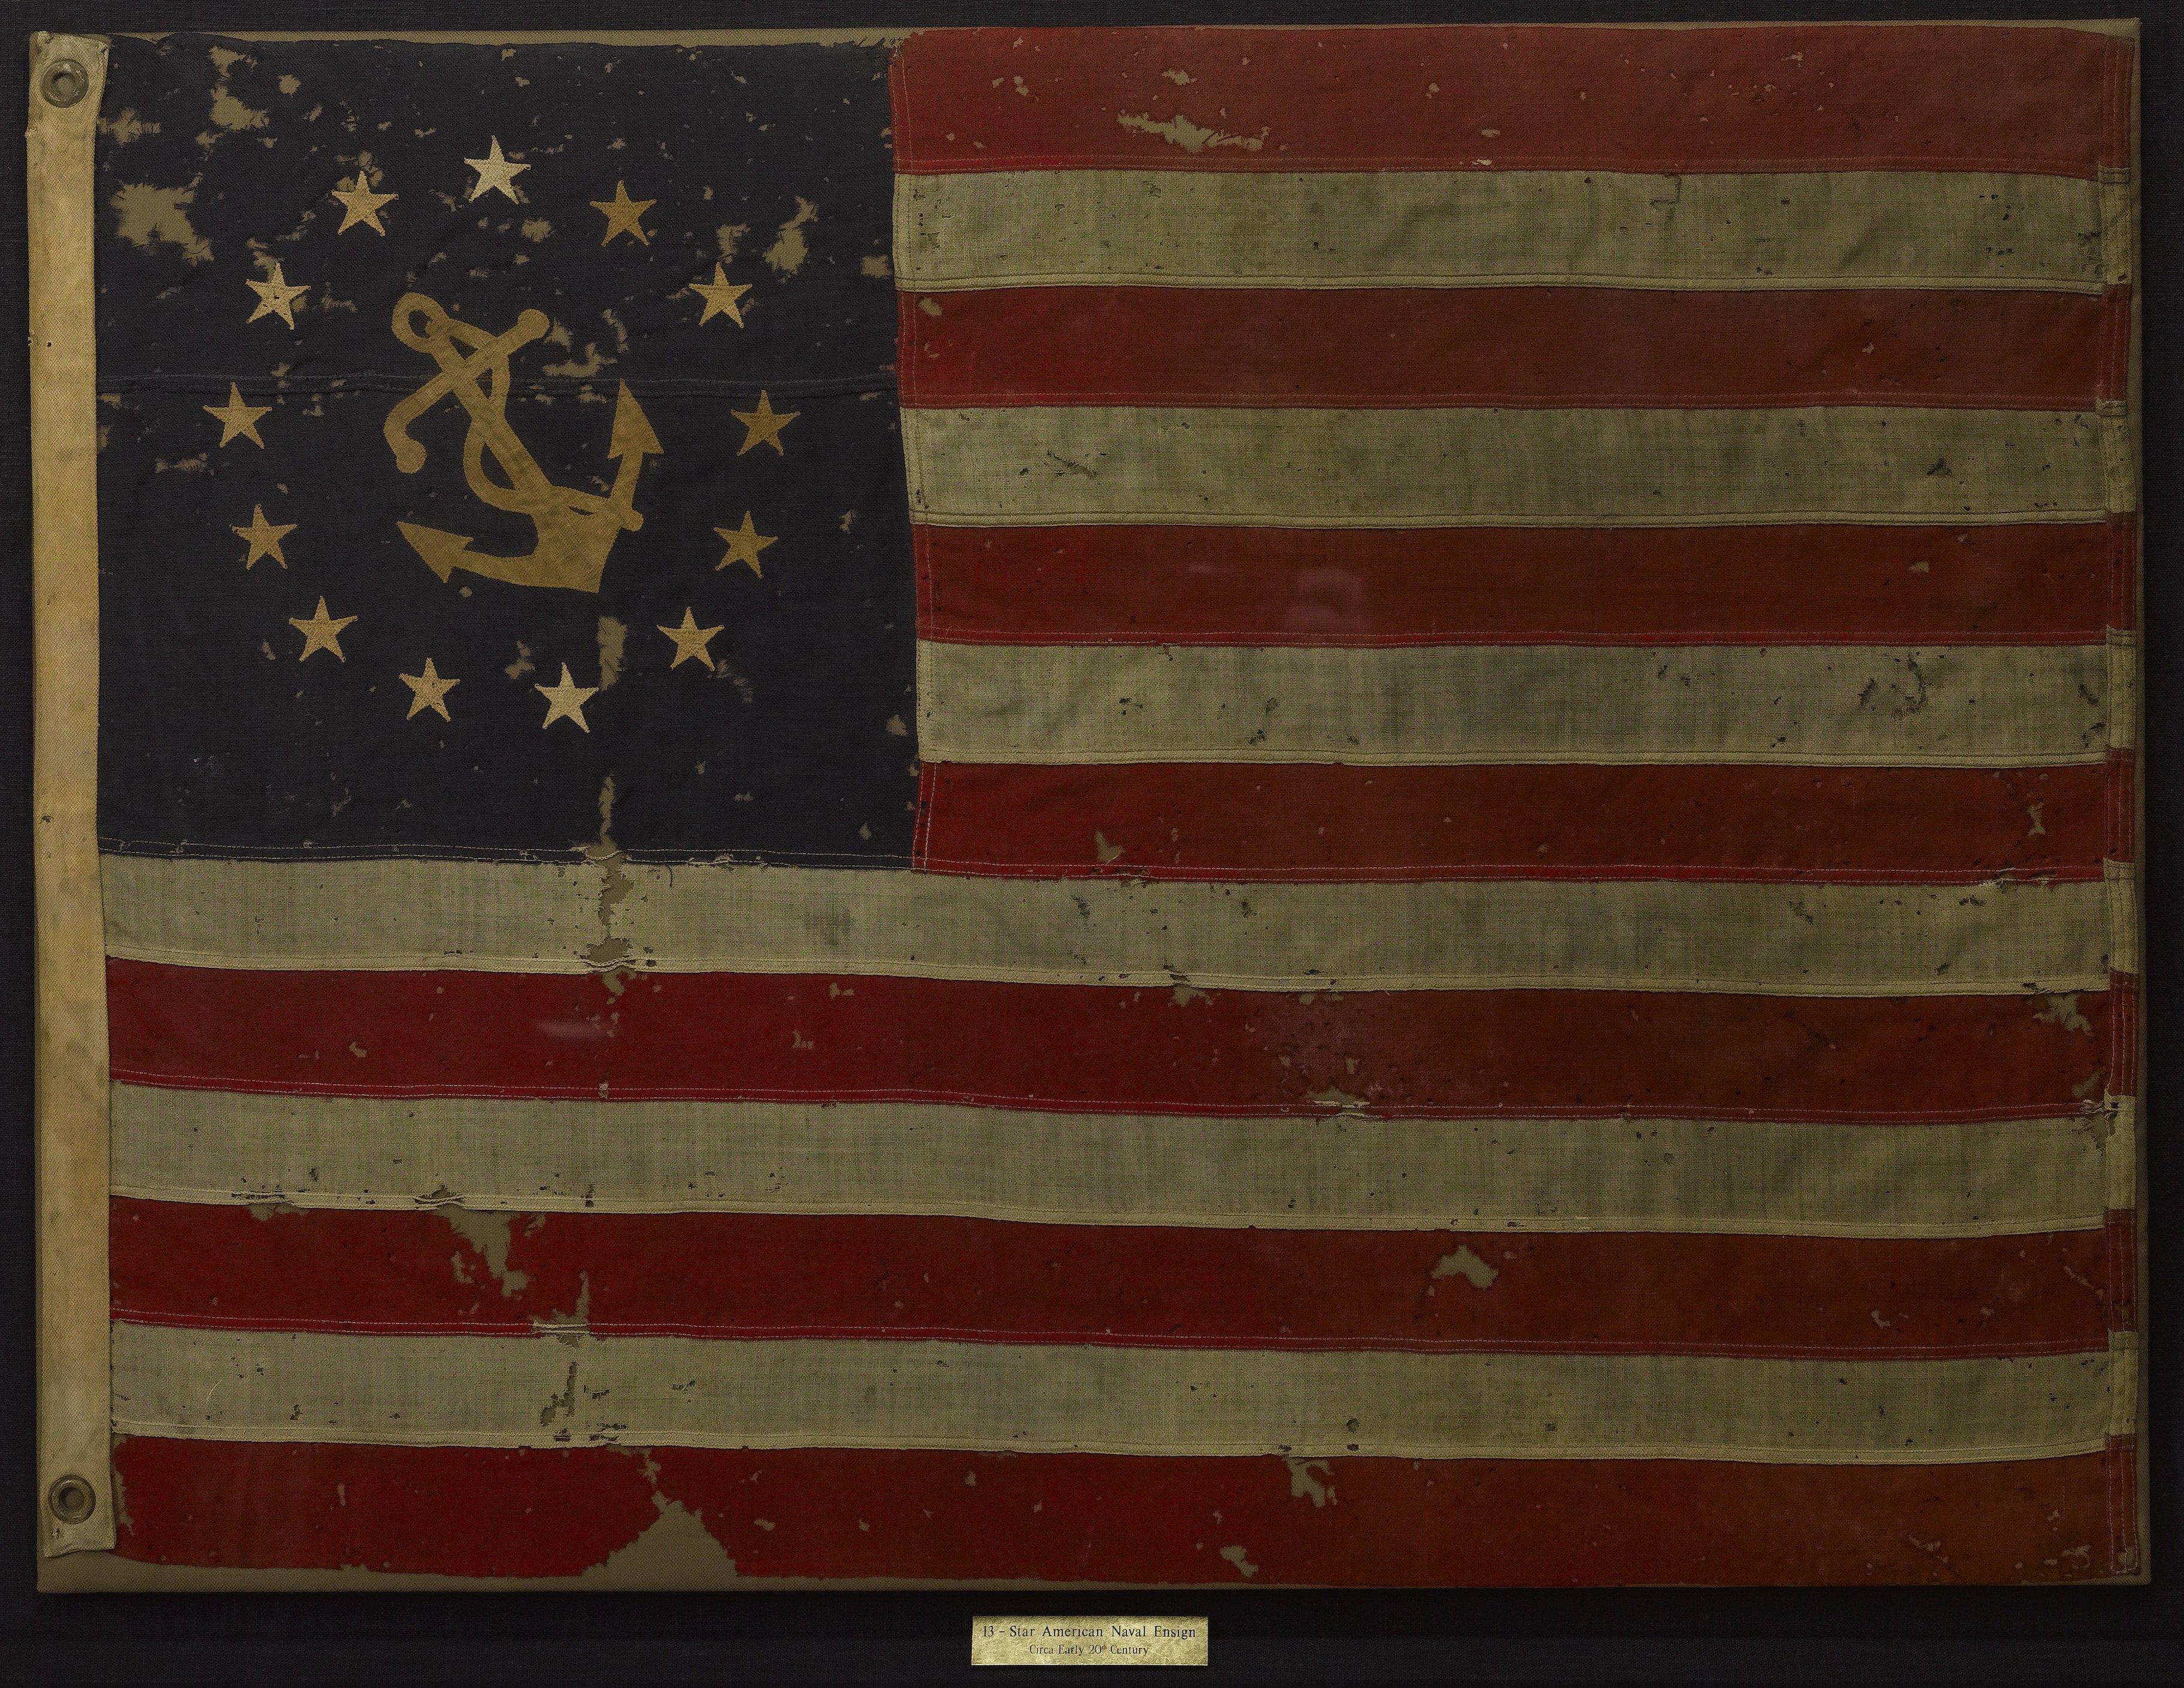 This is a 13-star American Naval Ensign from 1877. The flag has a large fouled anchor at the center of the canton. The anchor is encircled by 13 white stars. The circular arrangement of stars suggests unity and perpetuity, and it was a favorite